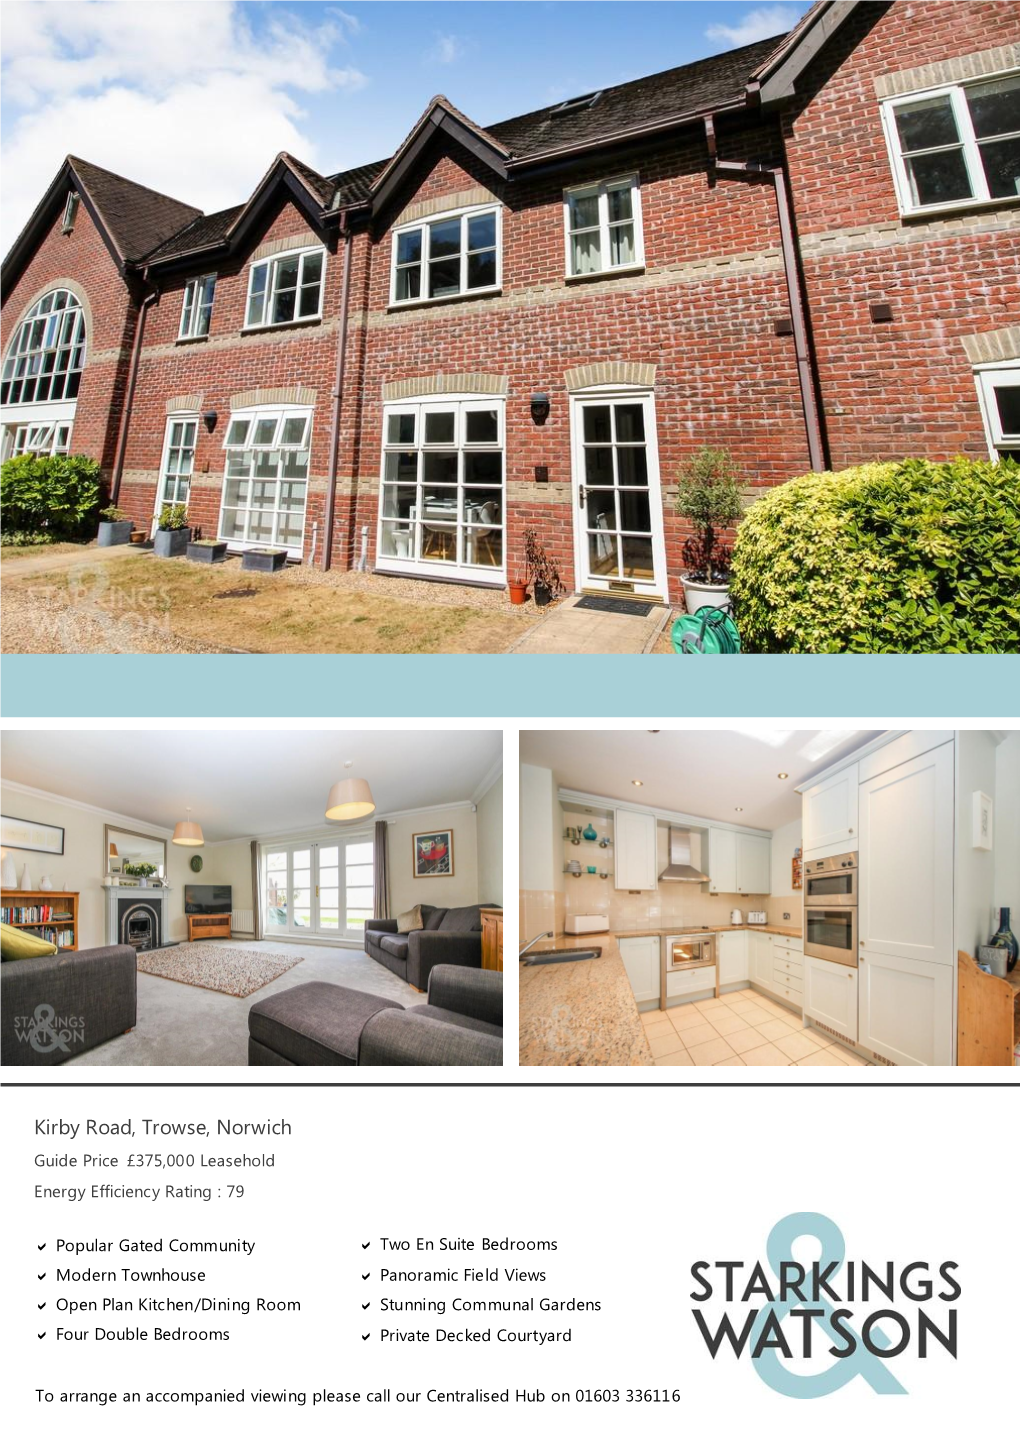 Kirby Road, Trowse, Norwich Guide Price £375,000 Leasehold Energy Efficiency Rating : 79